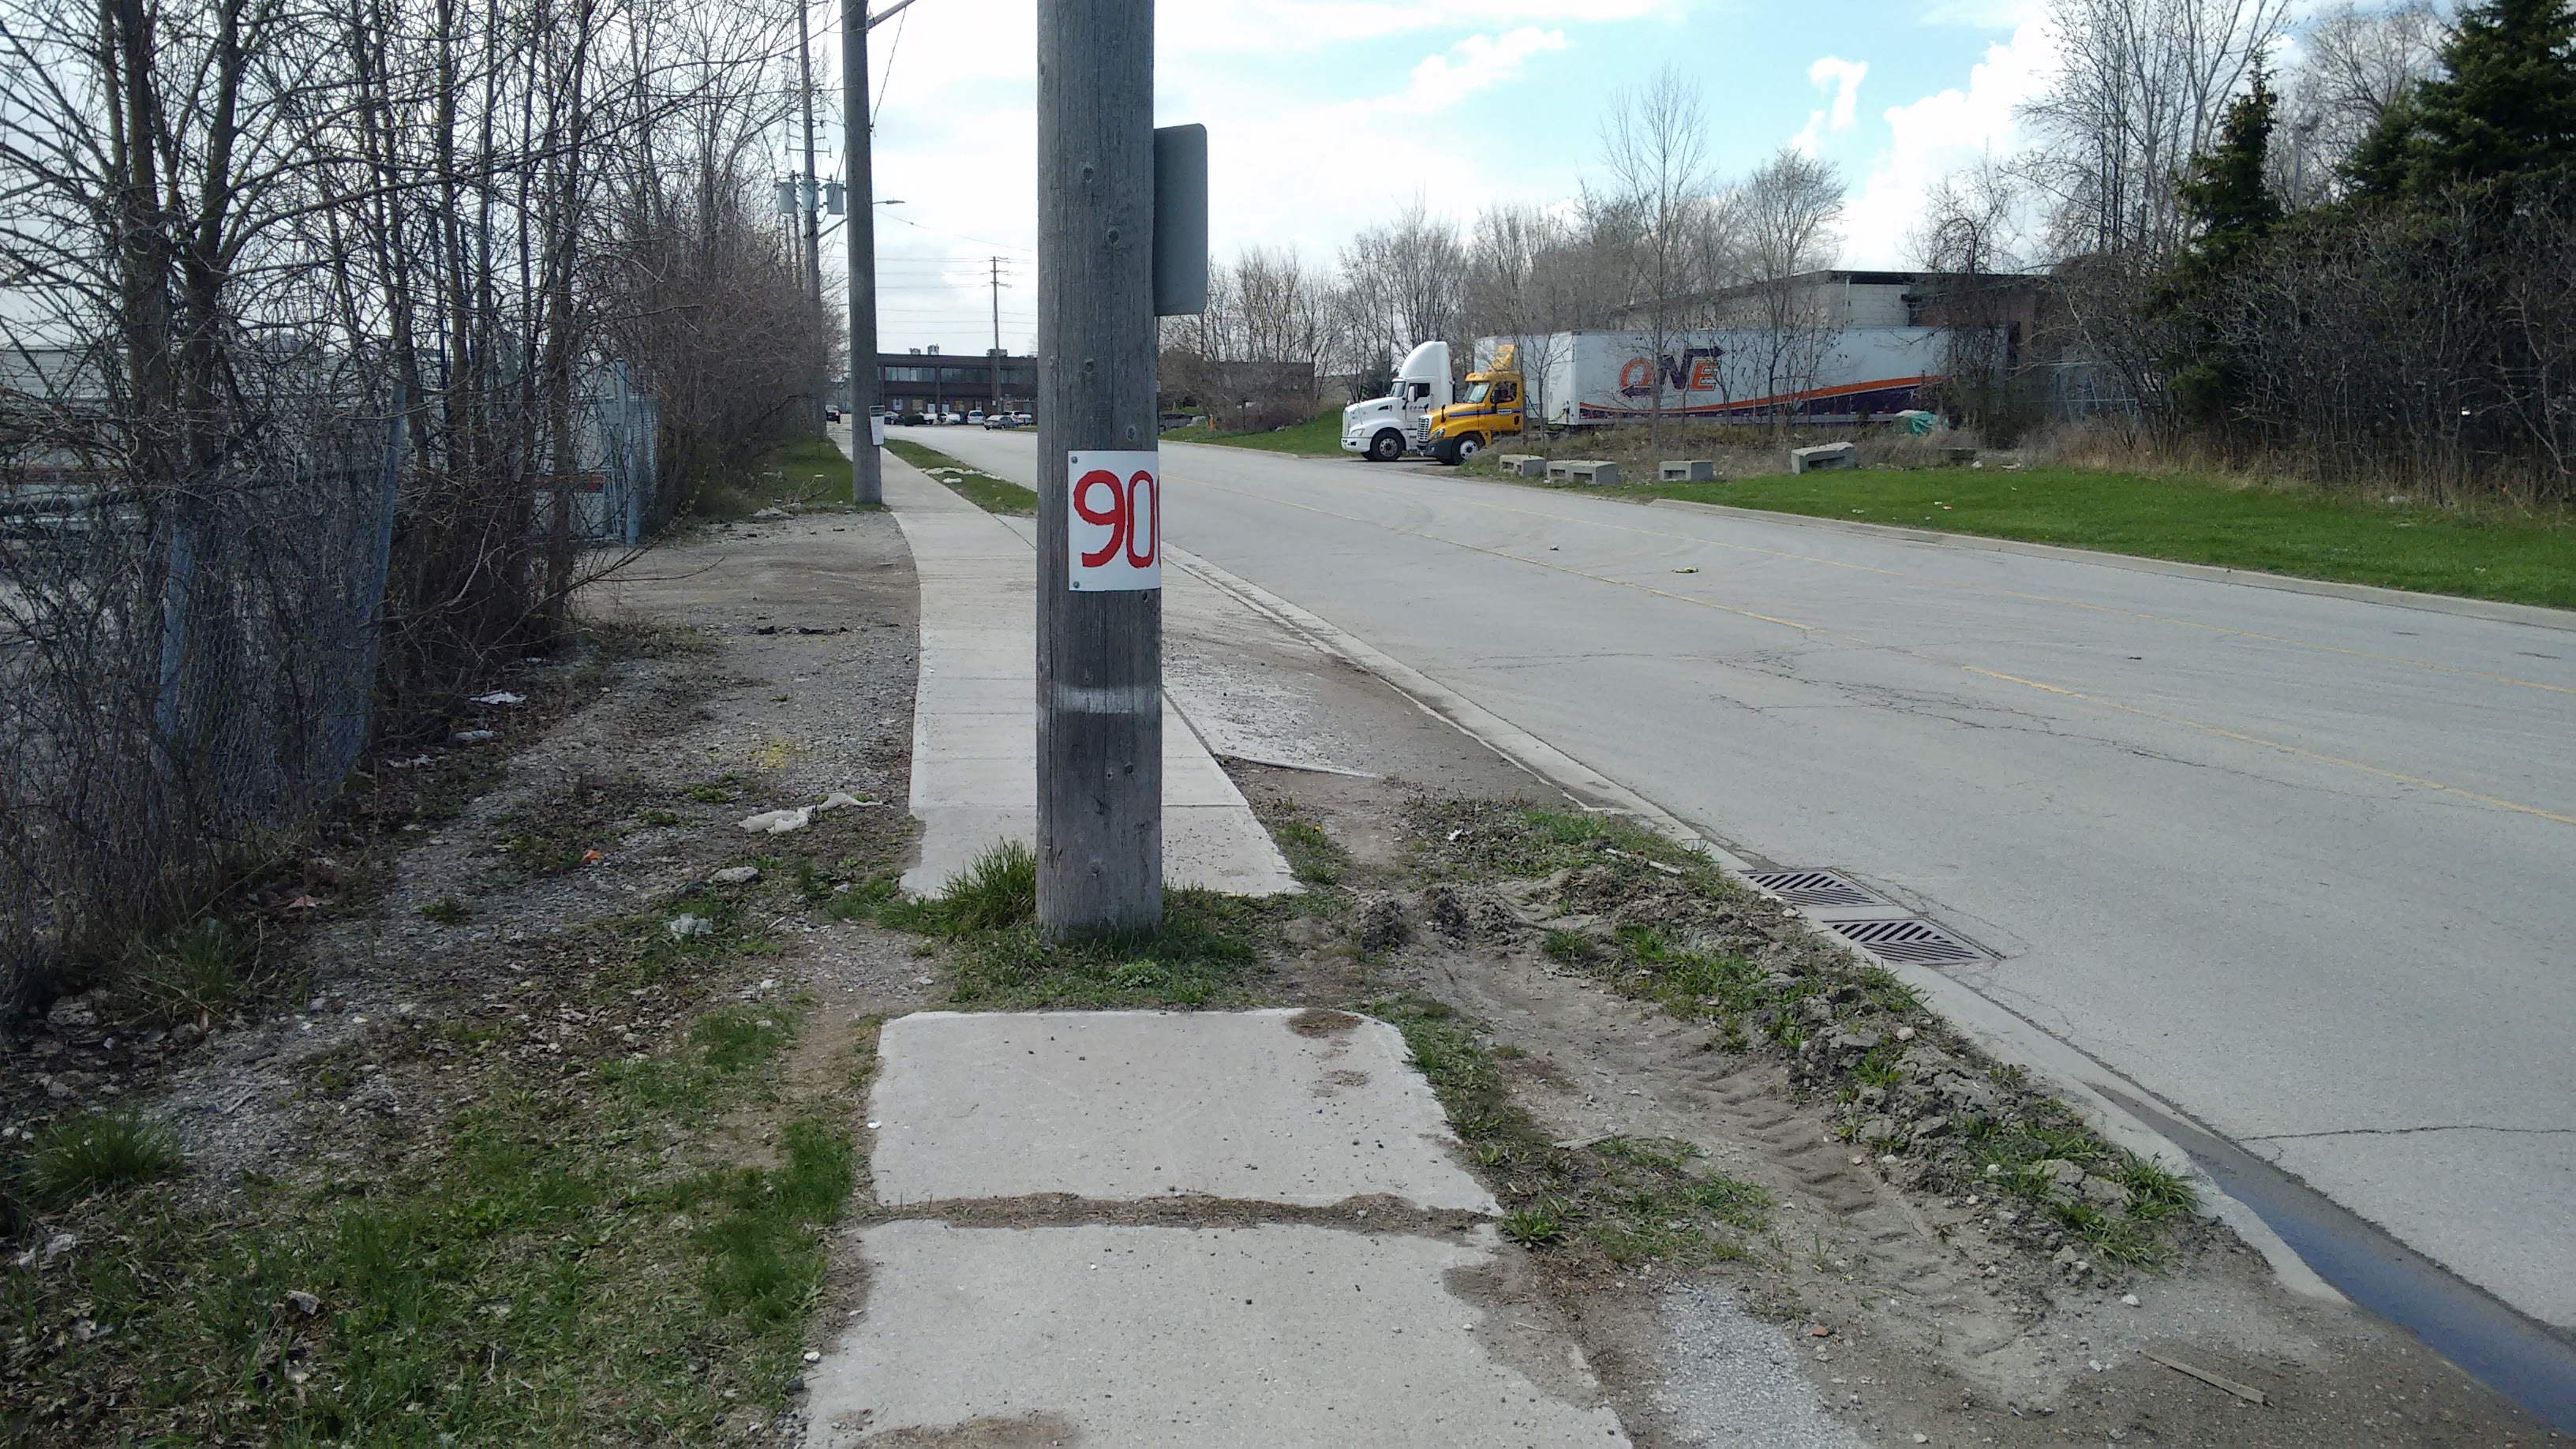 sidewalk with a telephone pole obtrusively blocking the way